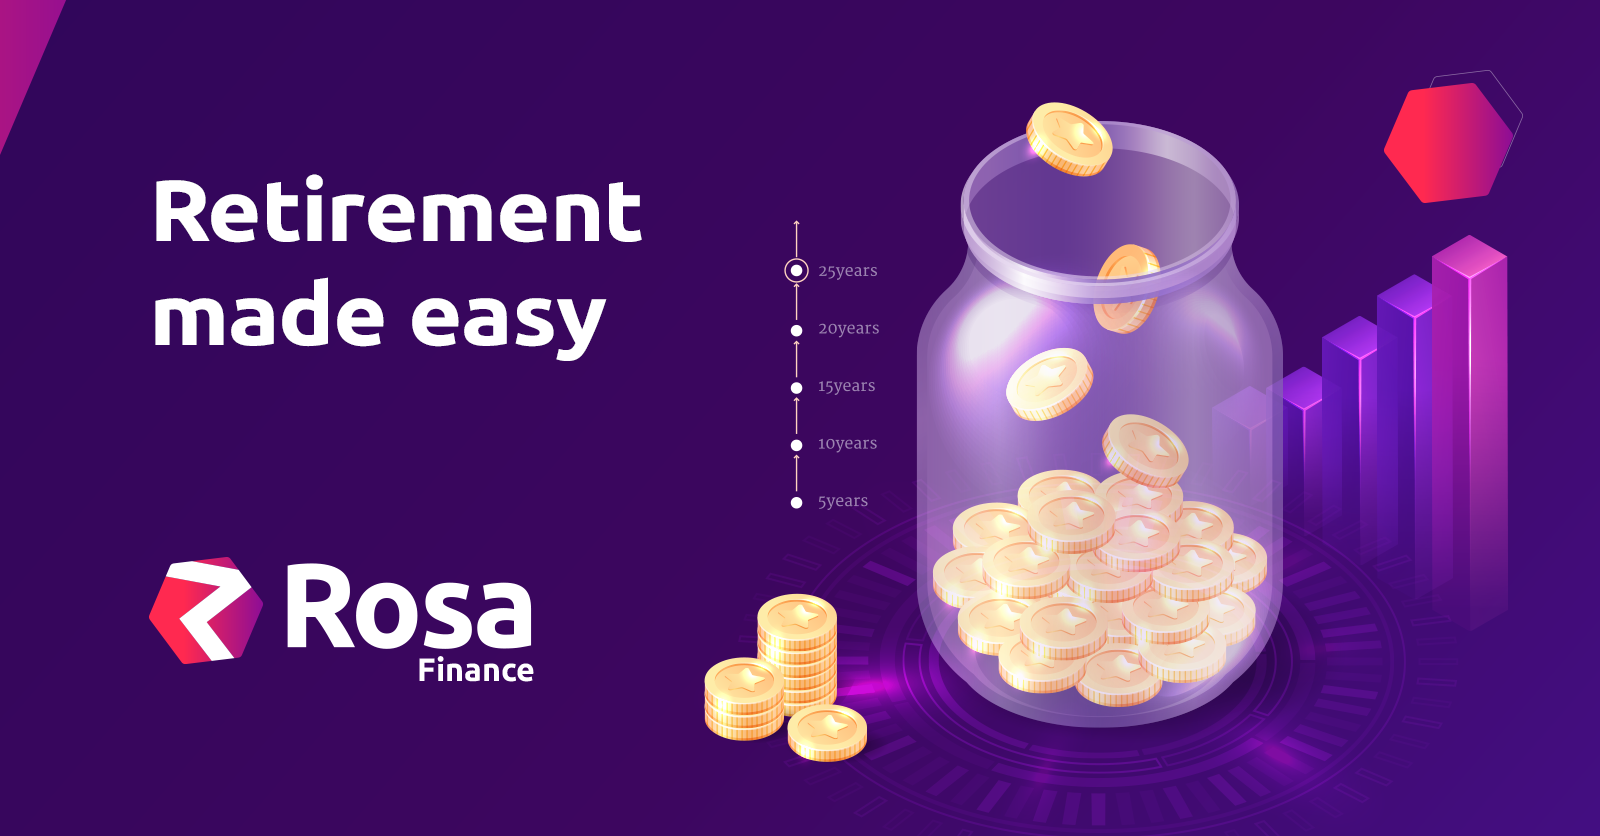 ROSA: A decentralized finance ecosystem poised to change the pension industry for the better